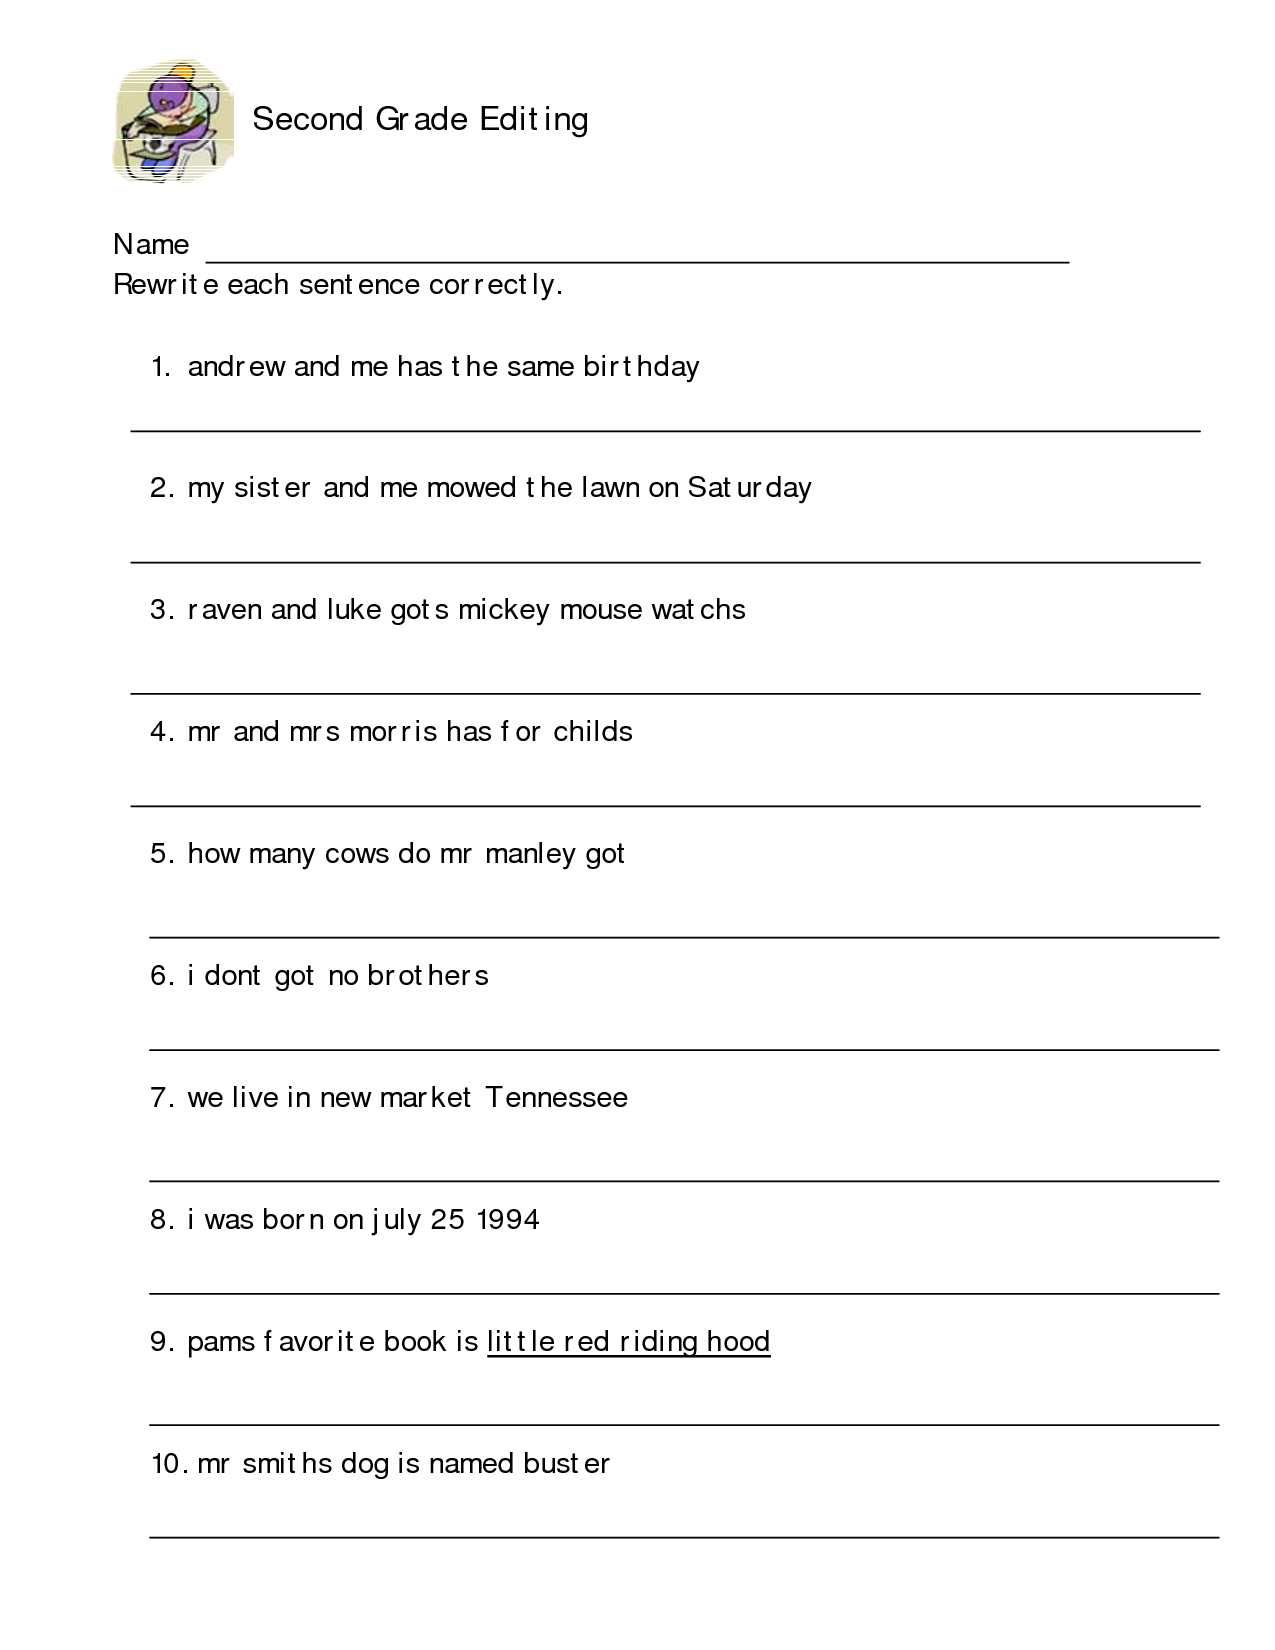 5th Grade Writing Skills Worksheets with Paragraph Editing Worksheets for 4th Grade Thanksgiving